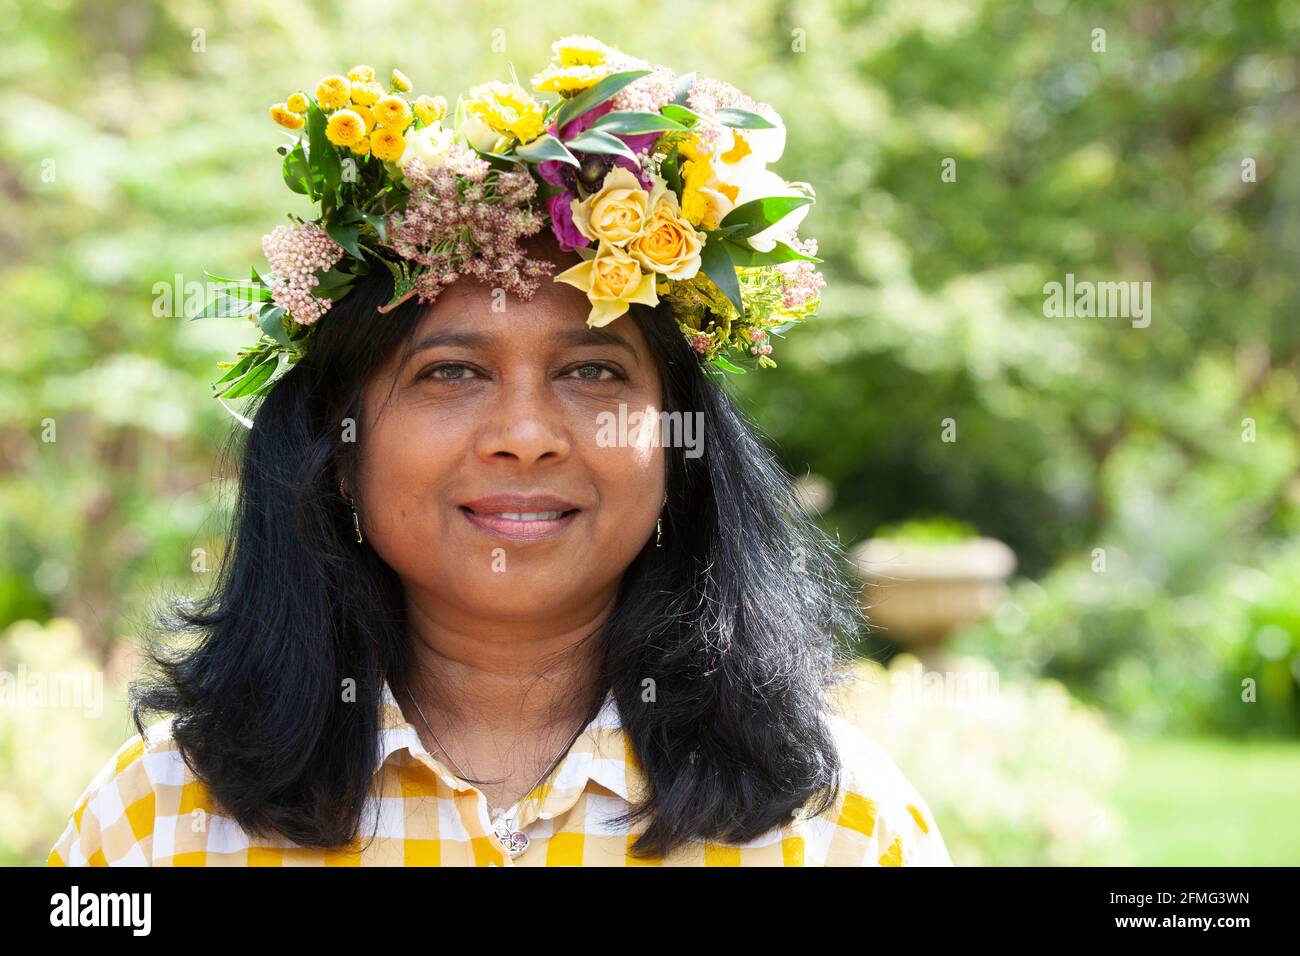 London, UK, 9 May 2021: Bea, an engineer who works in sustainable property  development, poses with the flower crown she made to celebrate Garden Day.  This event was at Chelsea Physic Garden